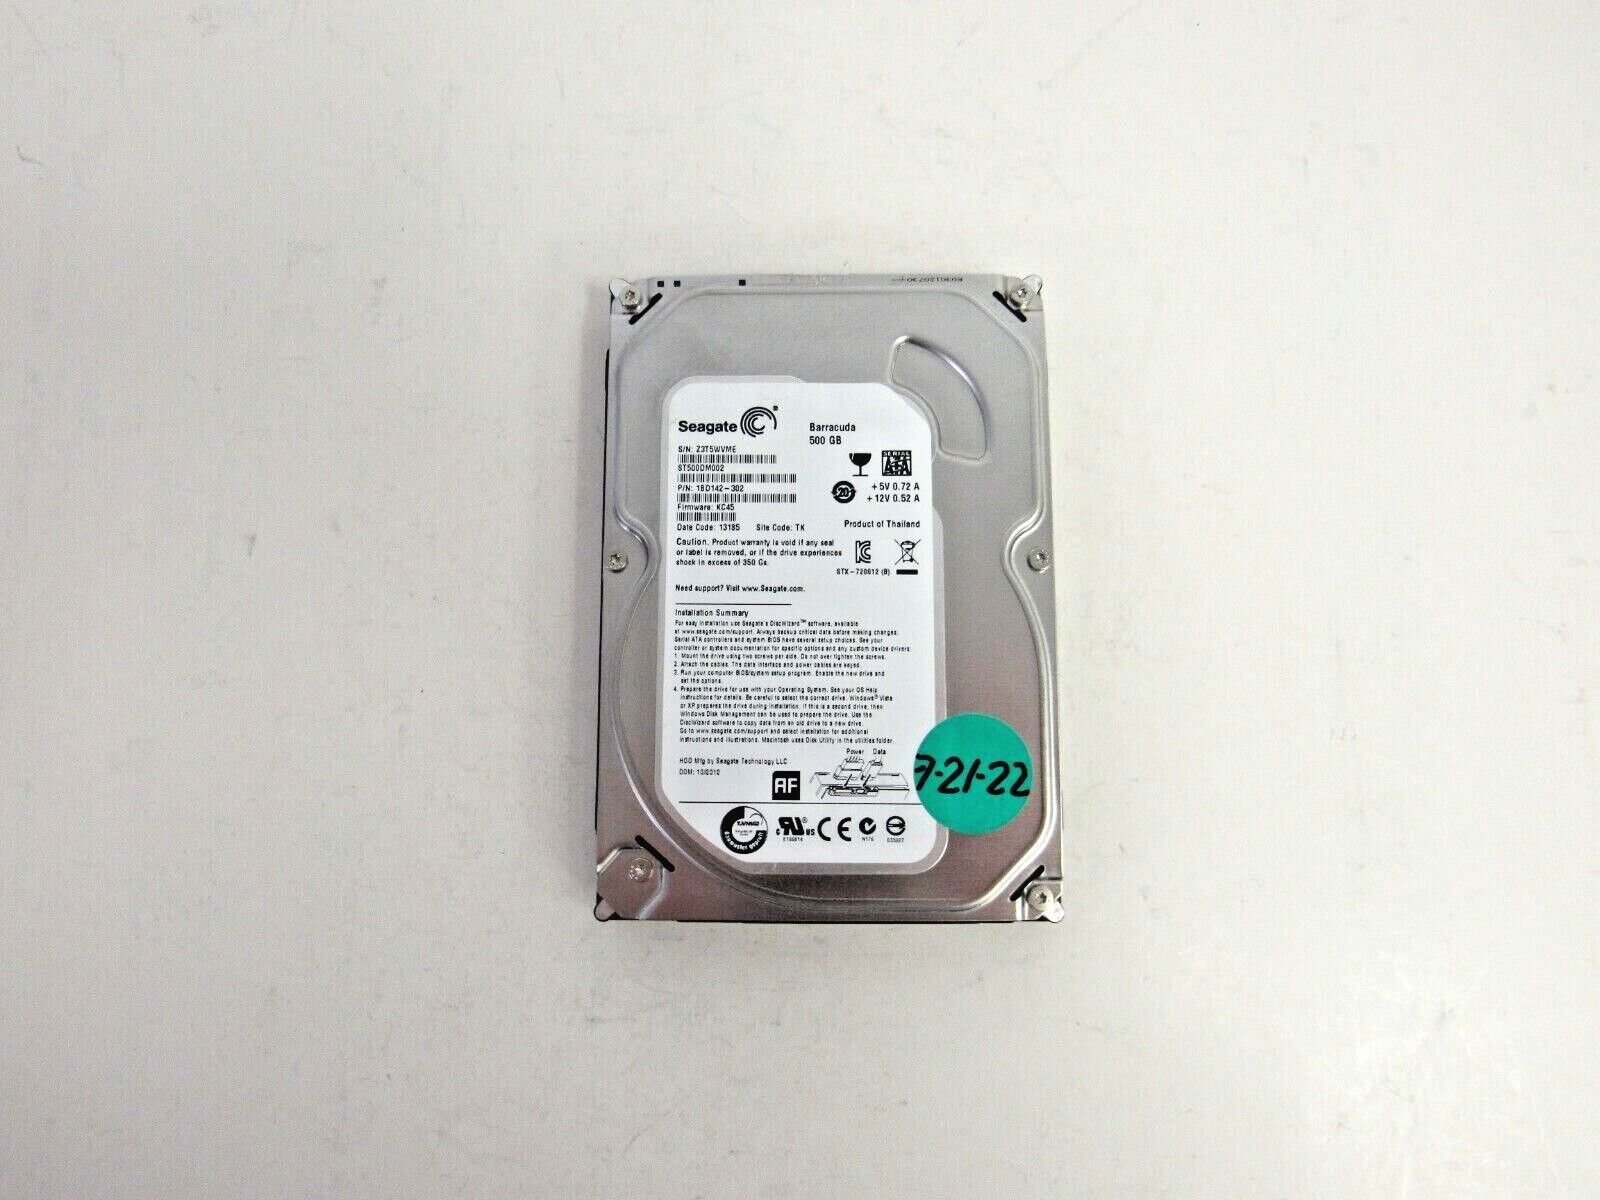 Primary image for Seagate ST500DM002 1BD142-302 500GB 7200RPM SATA 6Gbps 16MB Cache 3.5" HDD  46-3